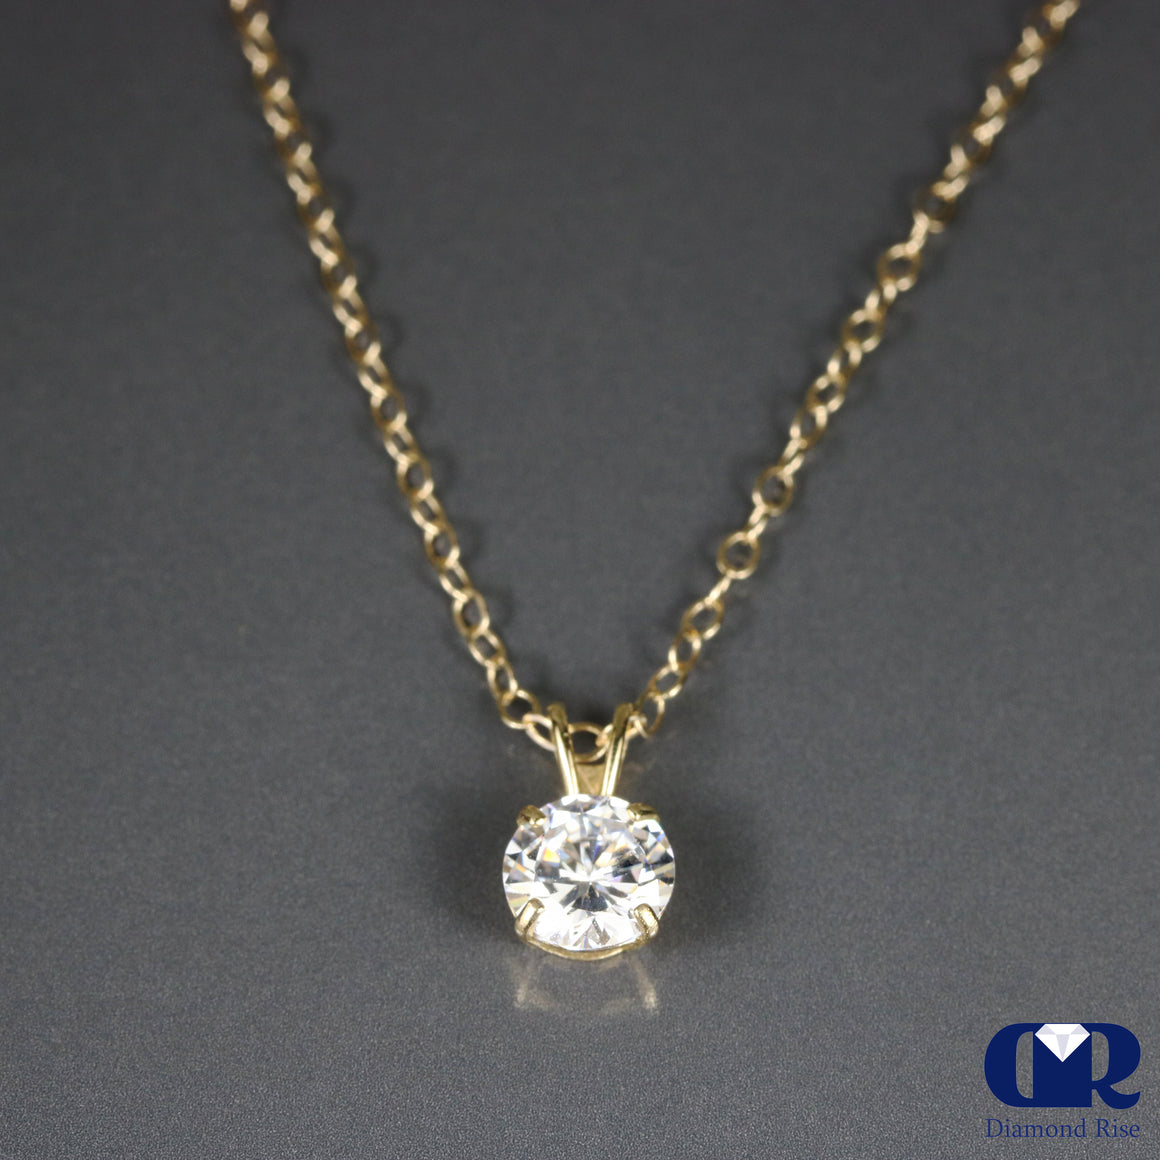 0.50 Ct Round Cut Diamond Solitaire Pendant Necklace 14K Gold With Chain - Diamond Rise Jewelry